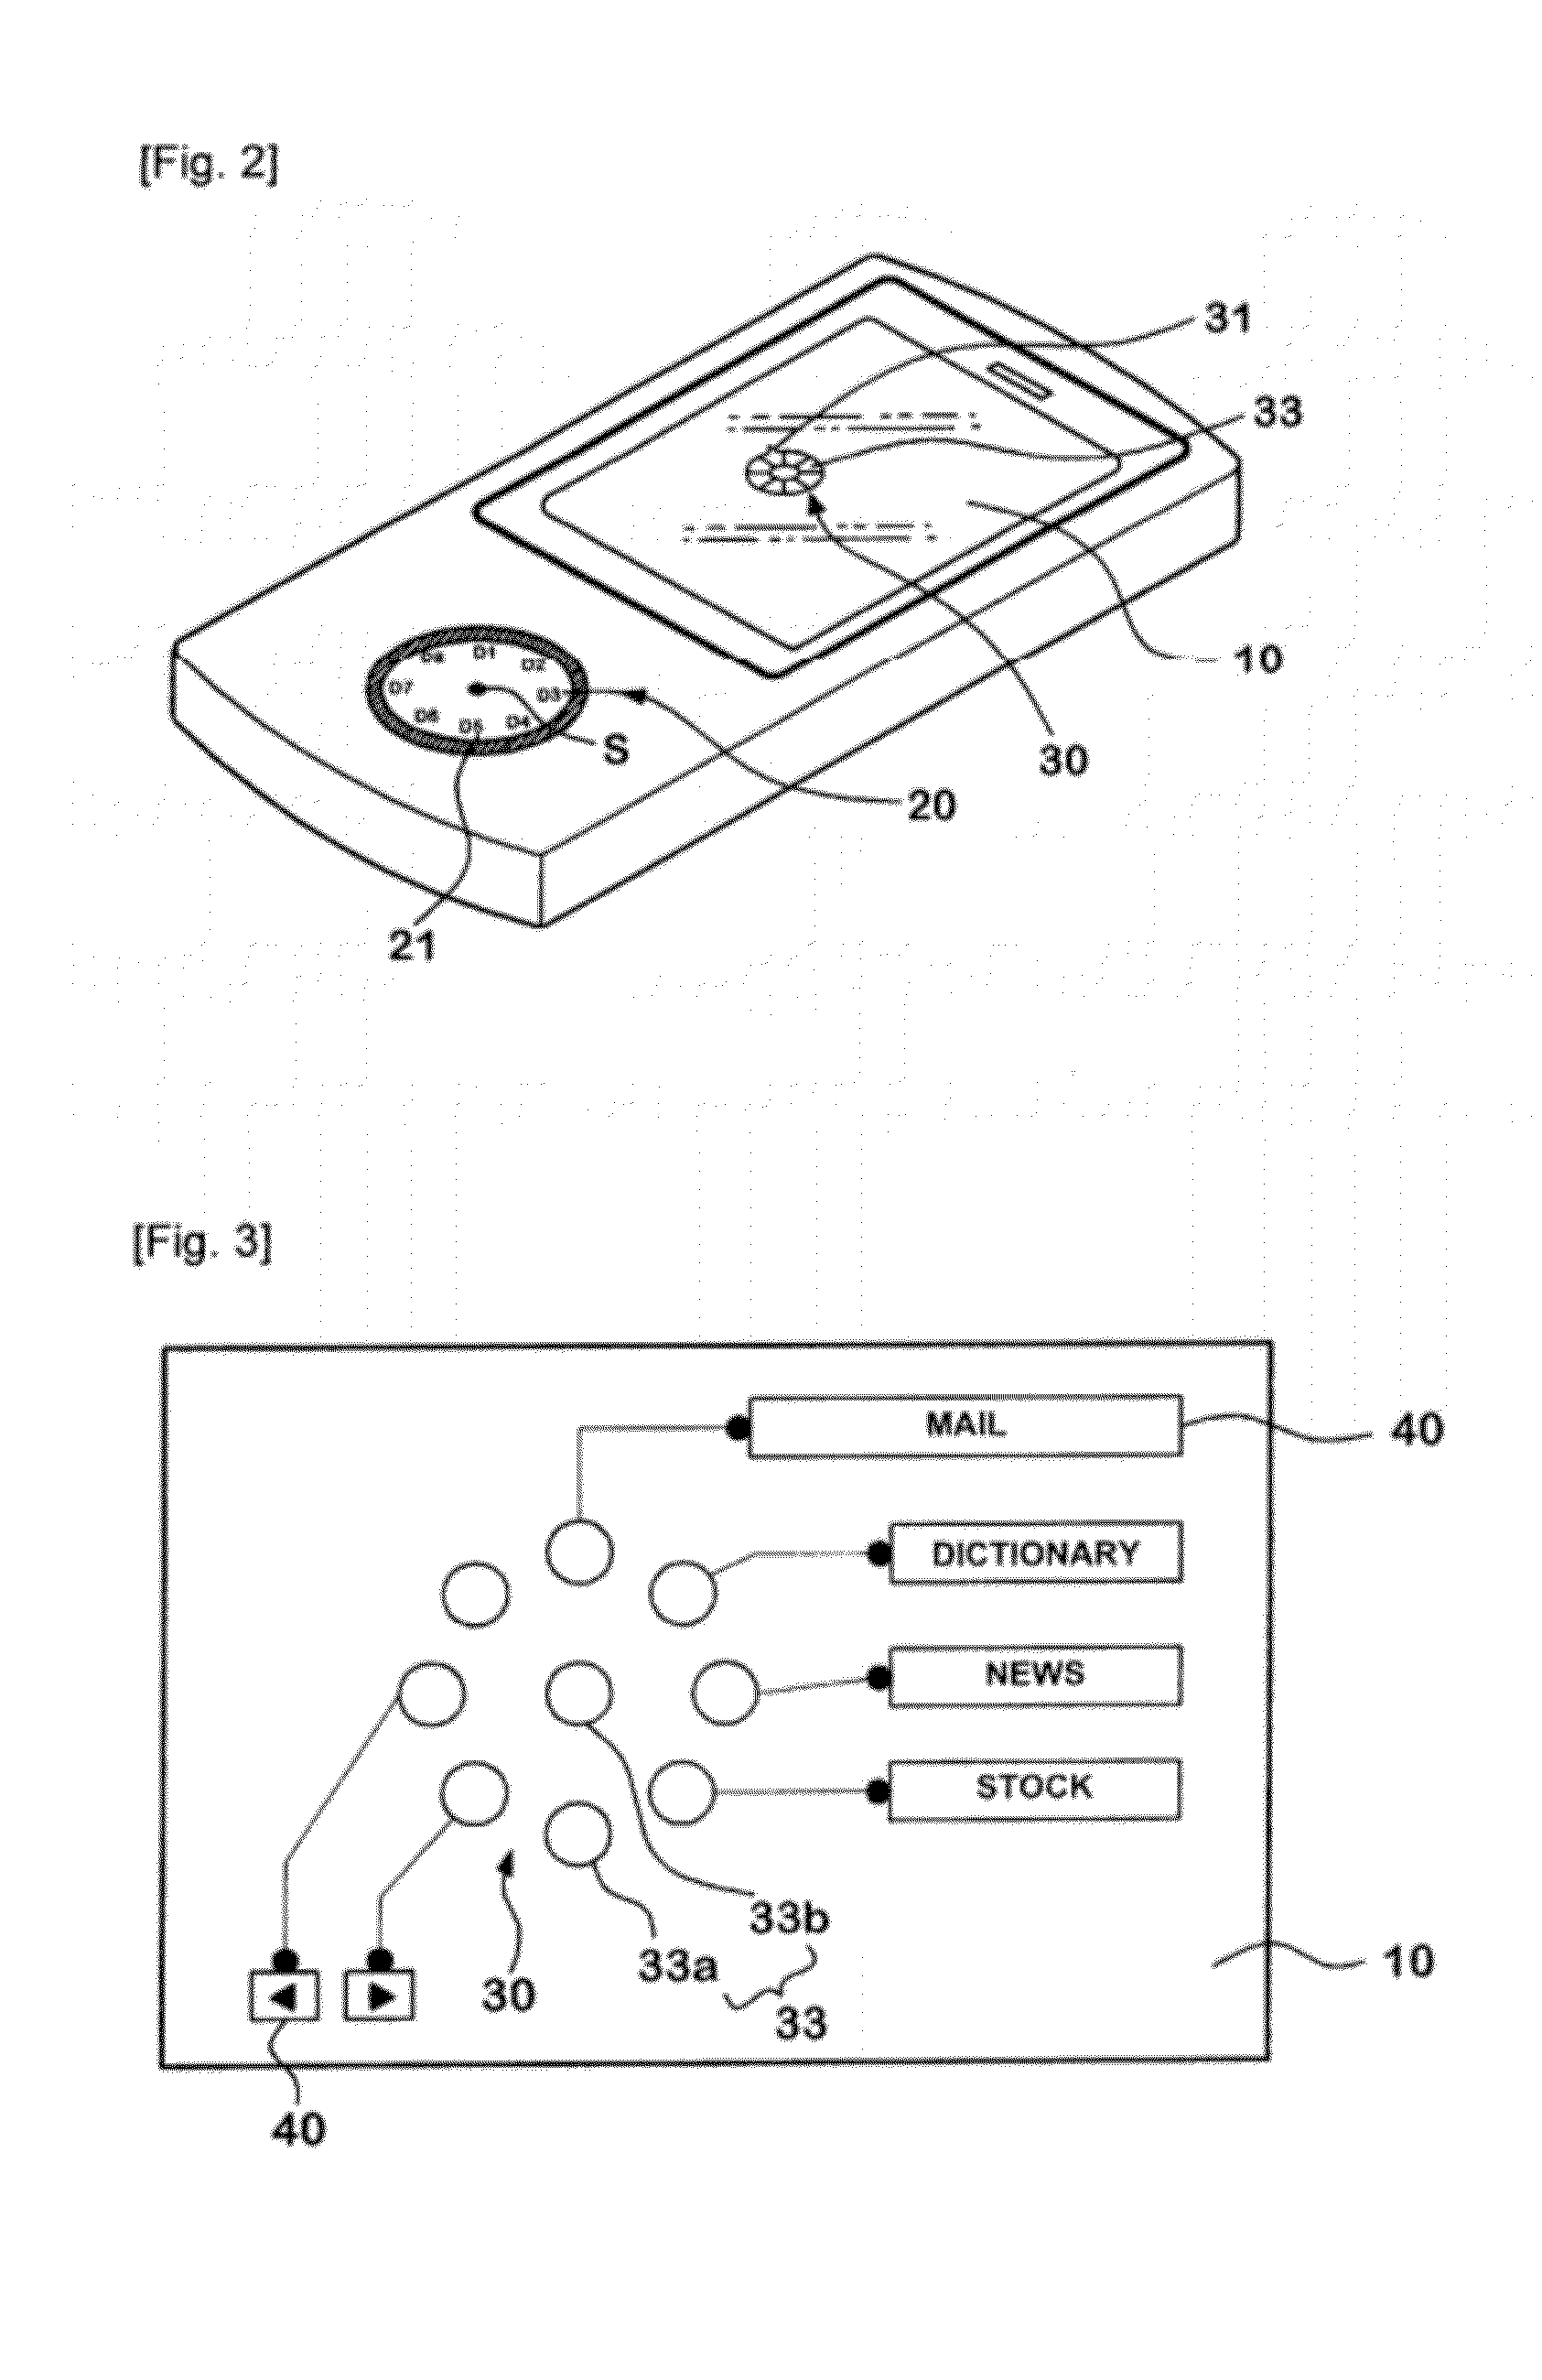 Multidirectional expansion cursor and method for forming a multidirectional expansion cursor